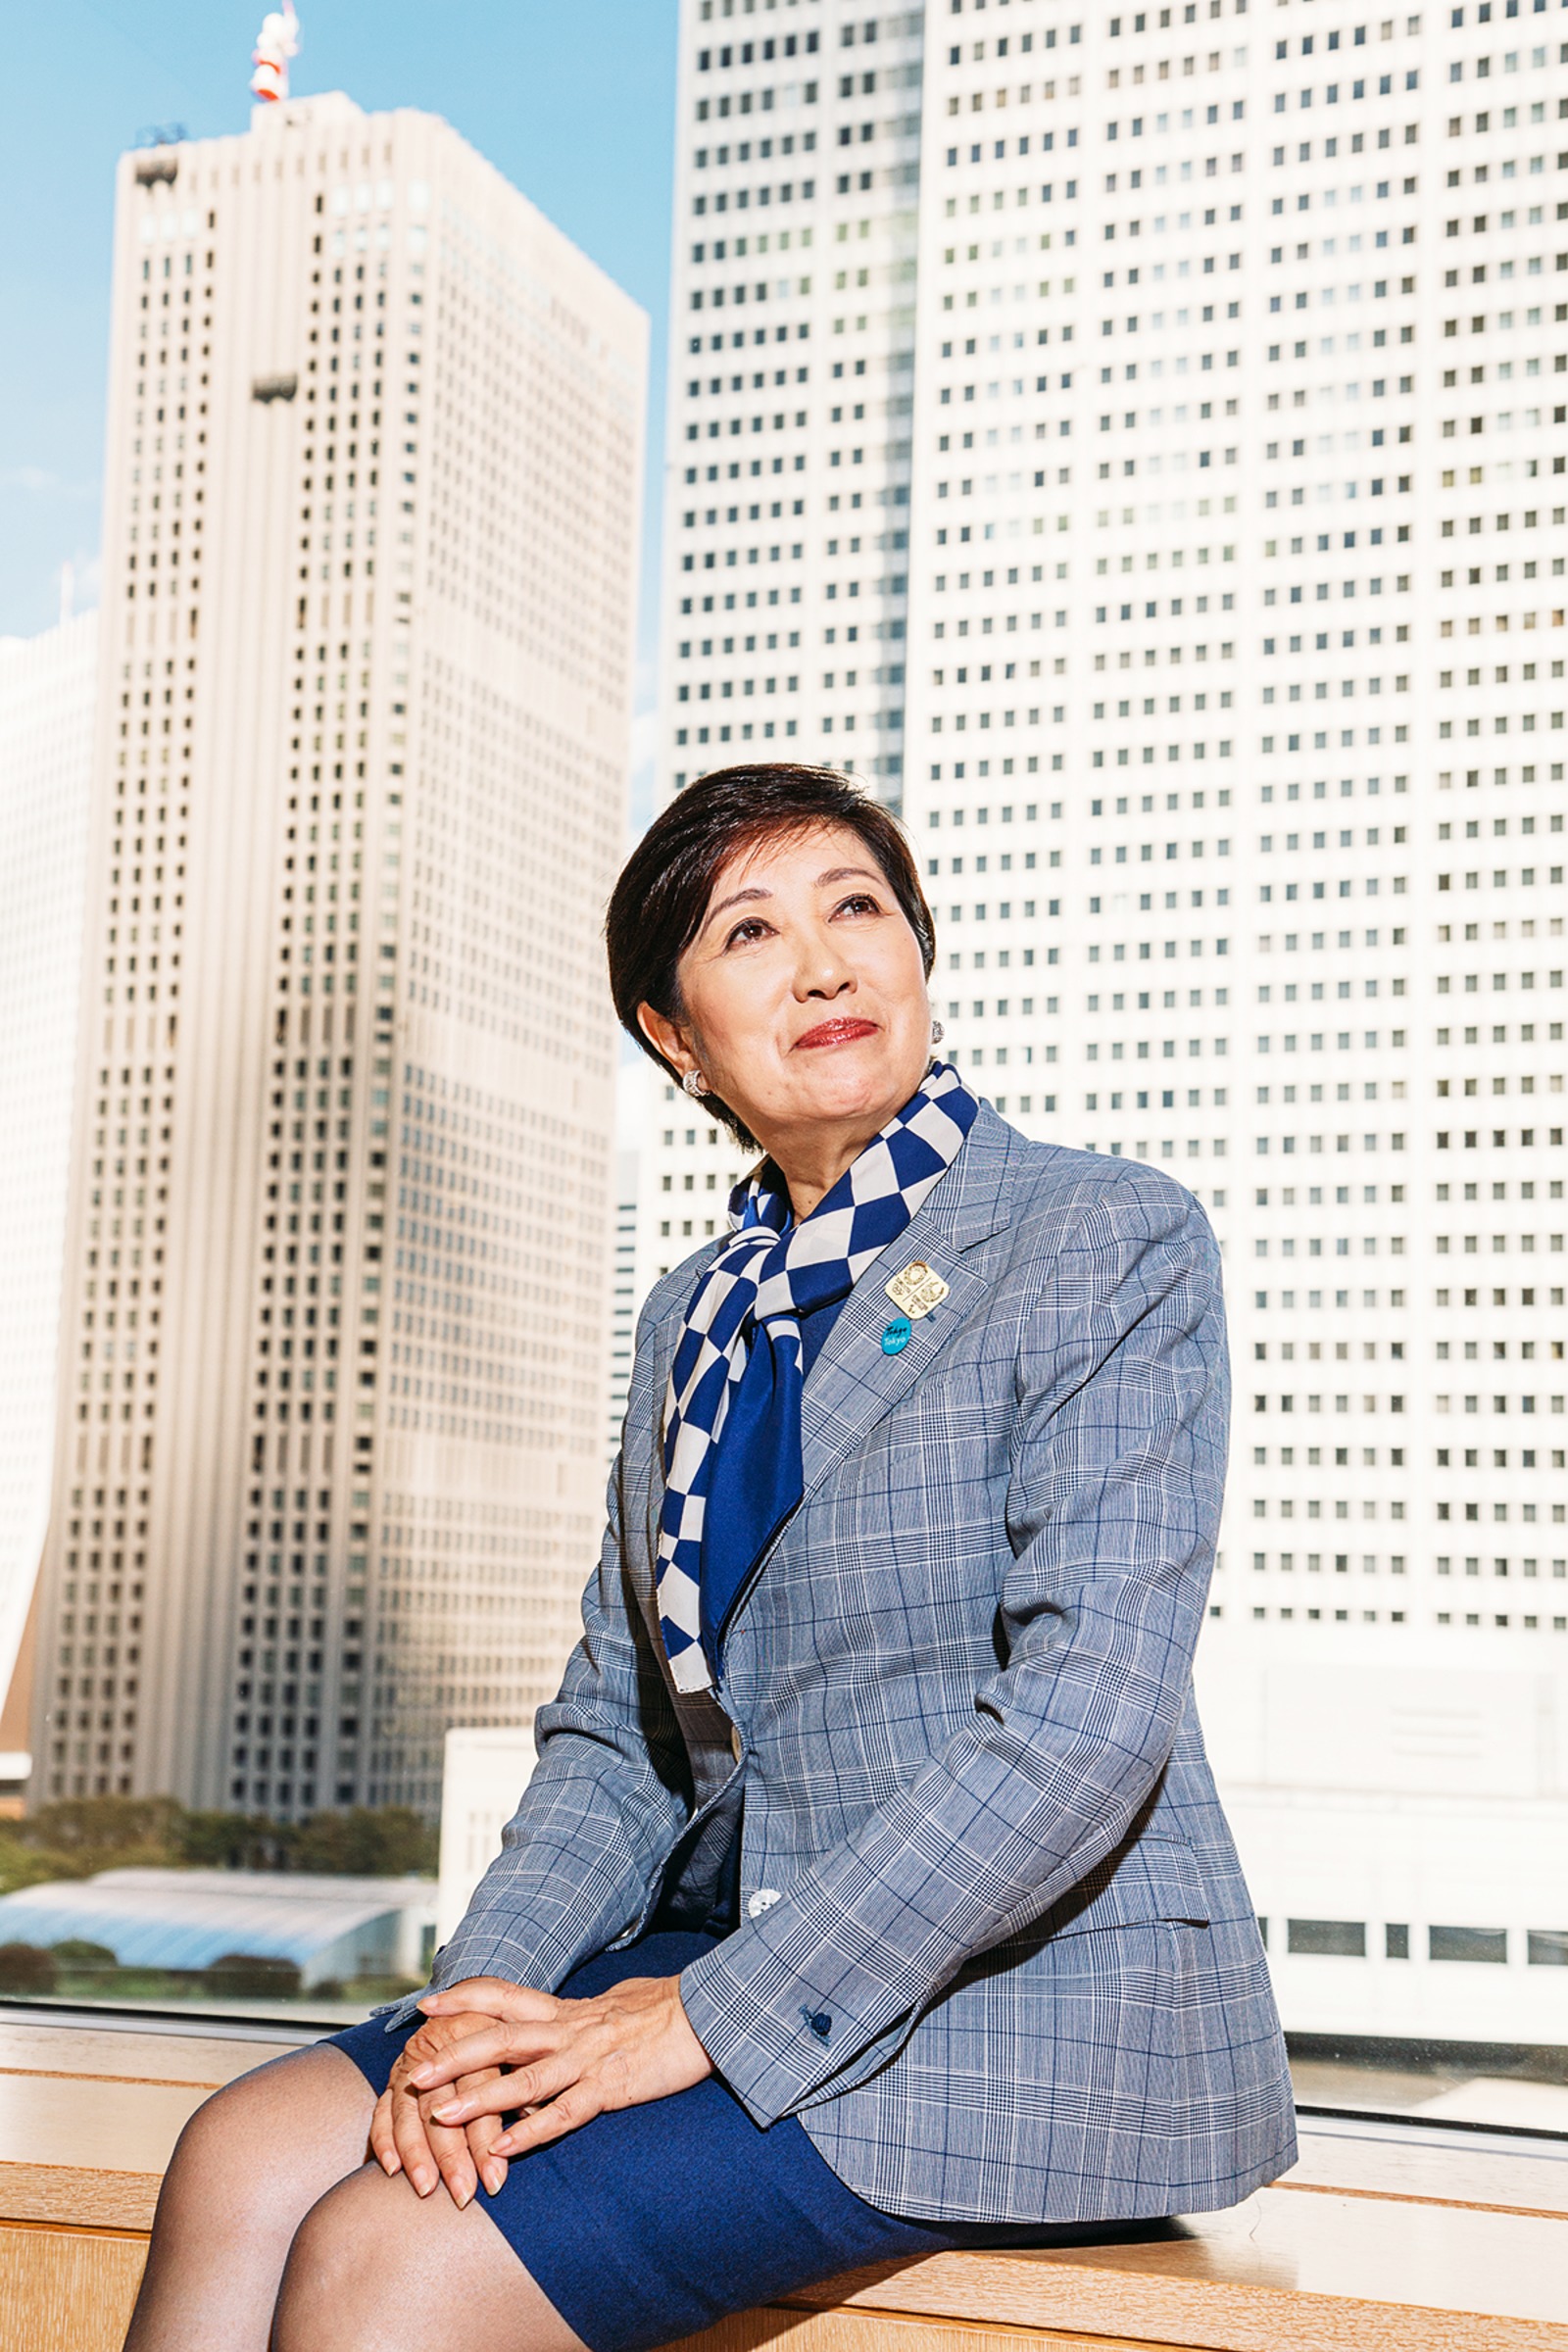 Tokyo Governor Yuriko Koike says her city is ready for next year’s rescheduled Olympic Games and sees opportunities to leverage the crisis to improve governance. (Kenji Chiga for TIME)